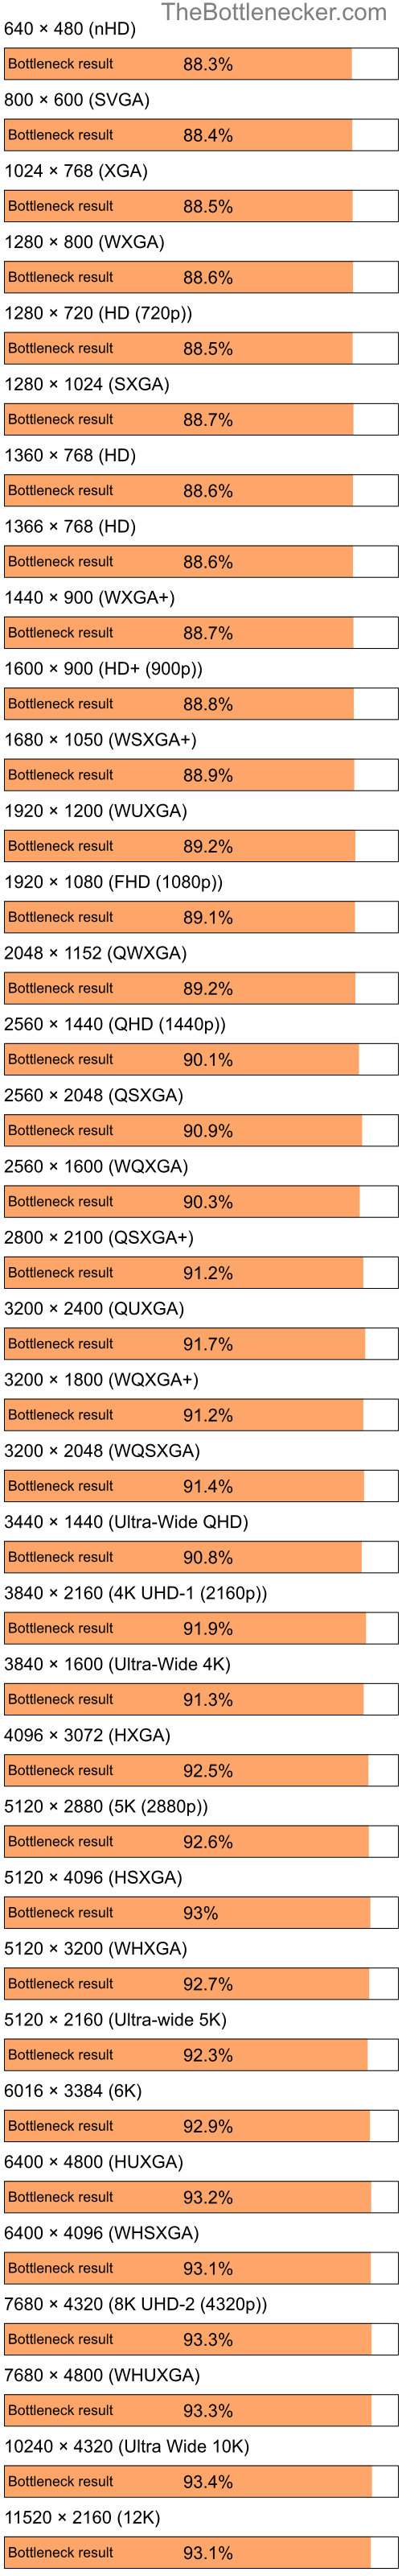 Bottleneck results by resolution for Intel Celeron and AMD Mobility Radeon 9200 in Processor Intense Tasks